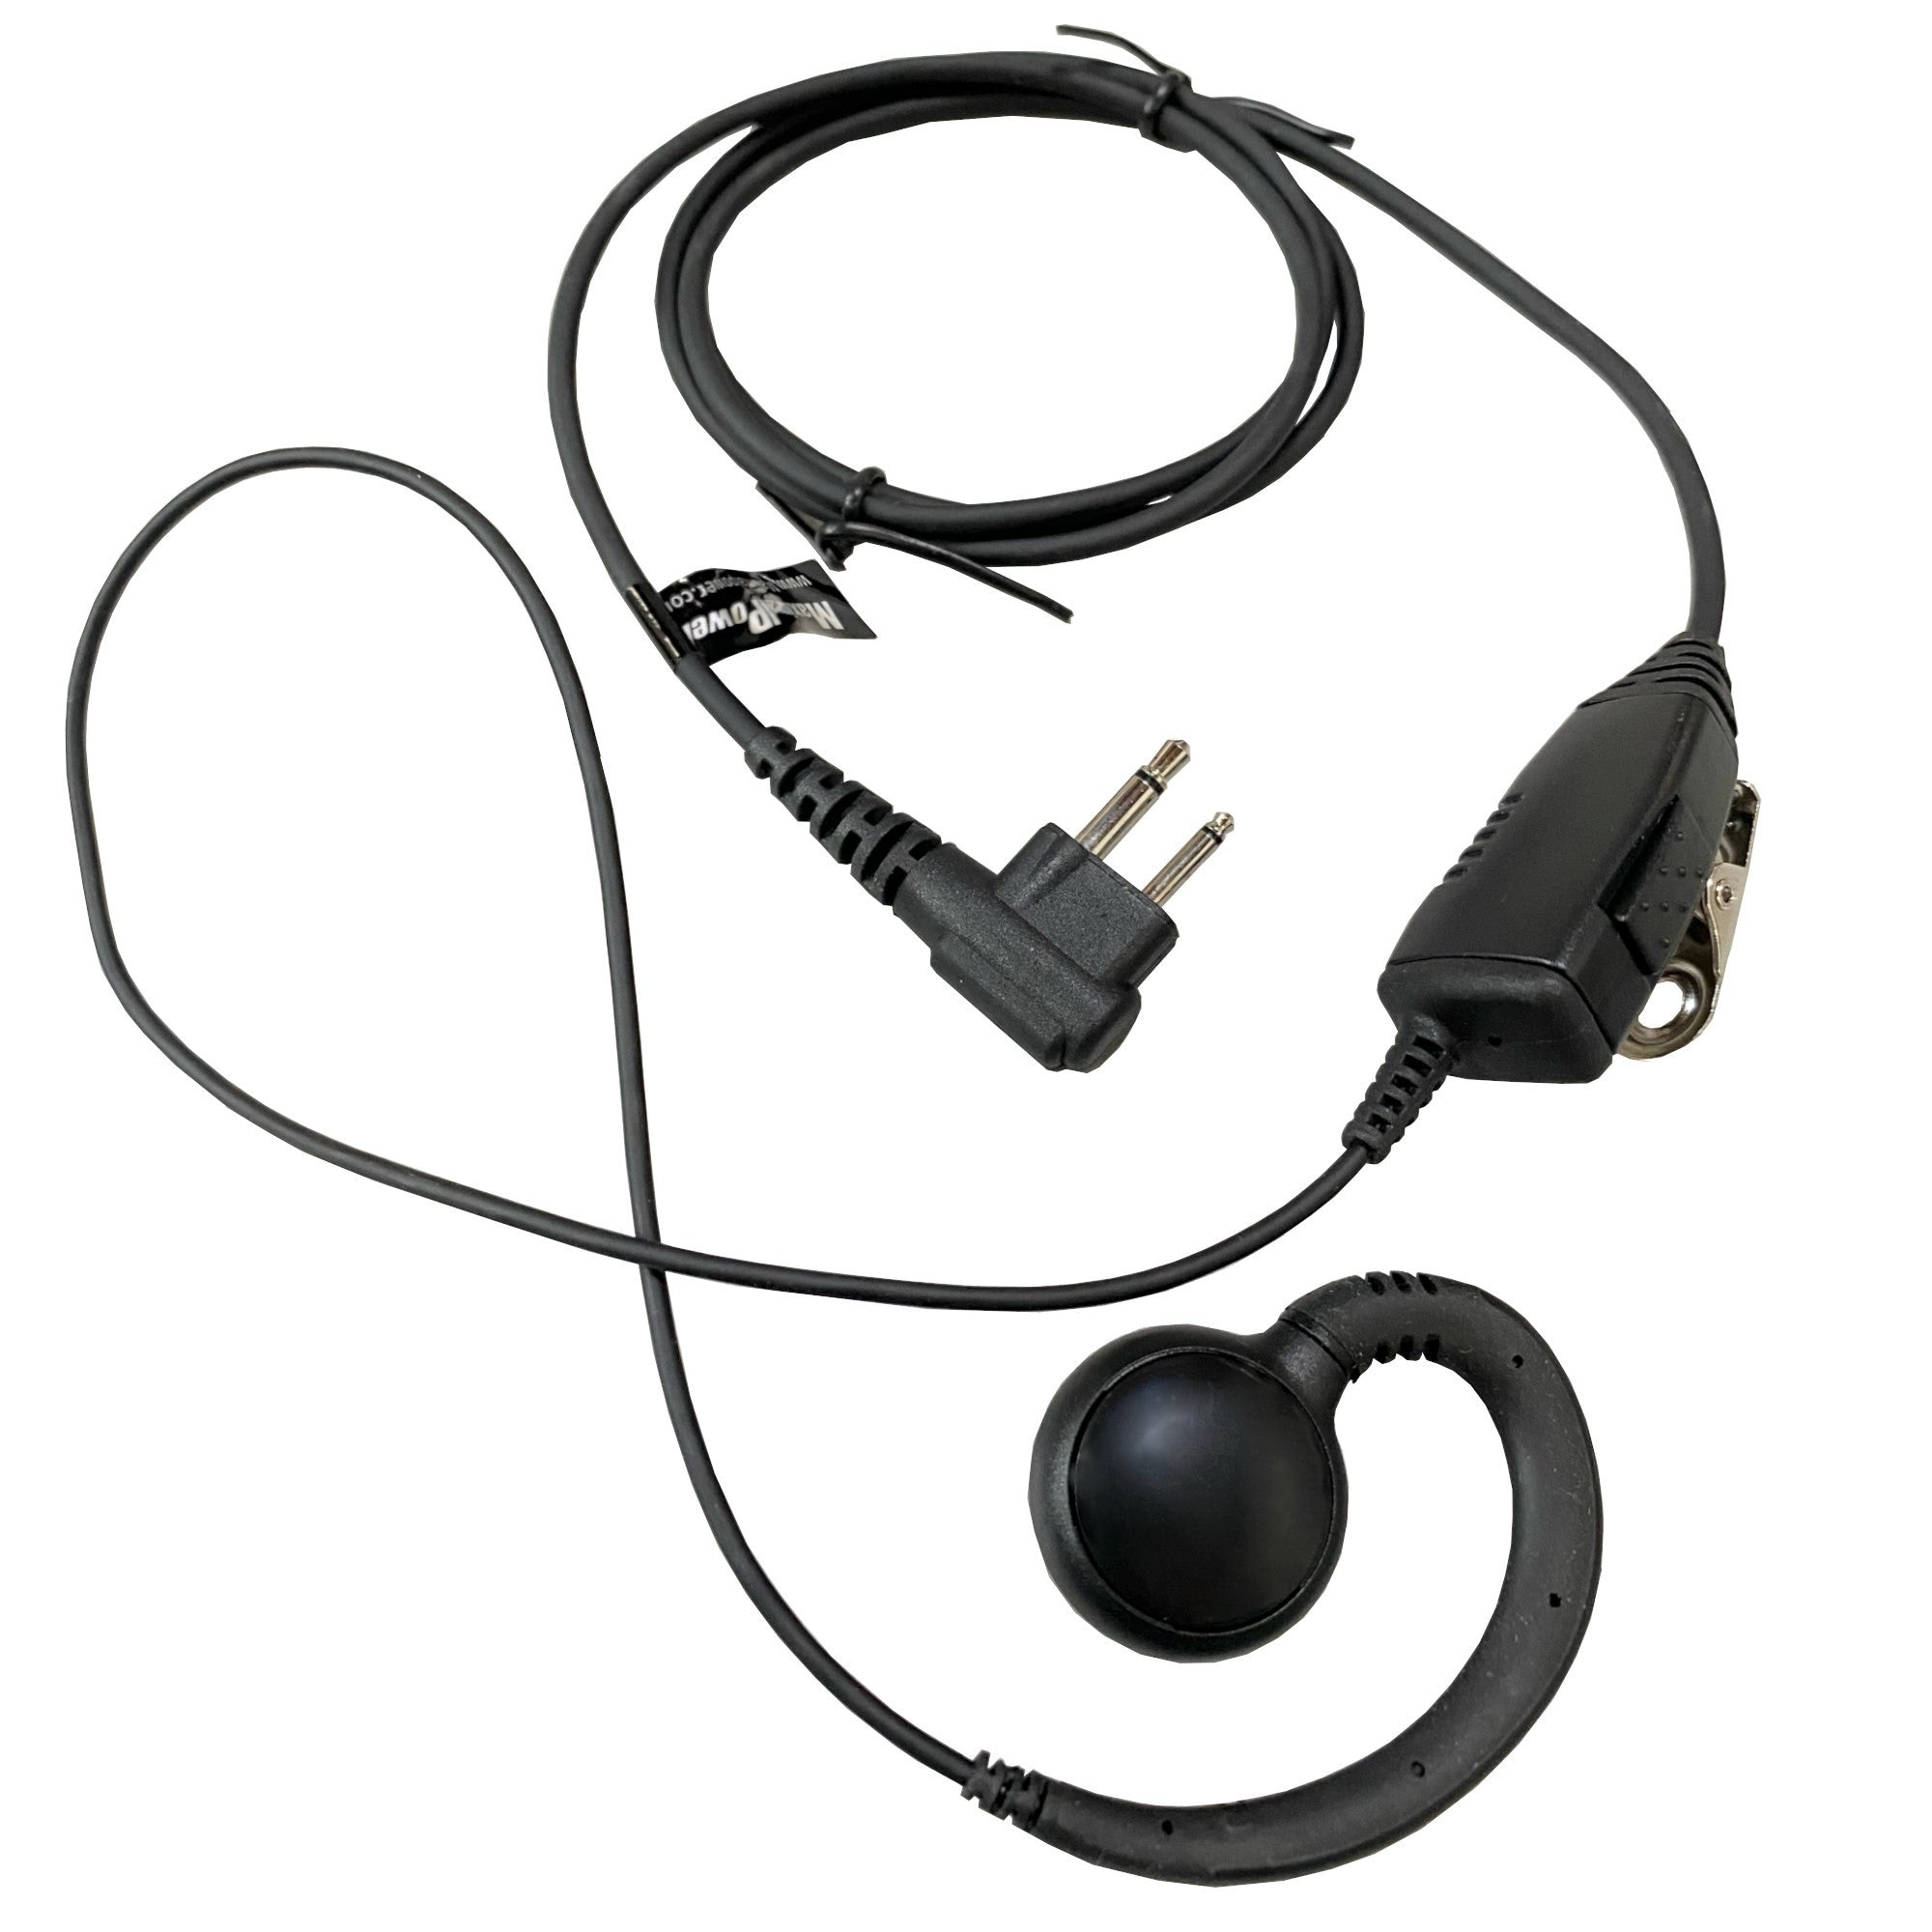 C-Style Ear Loop Headset PTT Mic for MOTOROLA 2-Pin Radio w/ Reinforced Cable